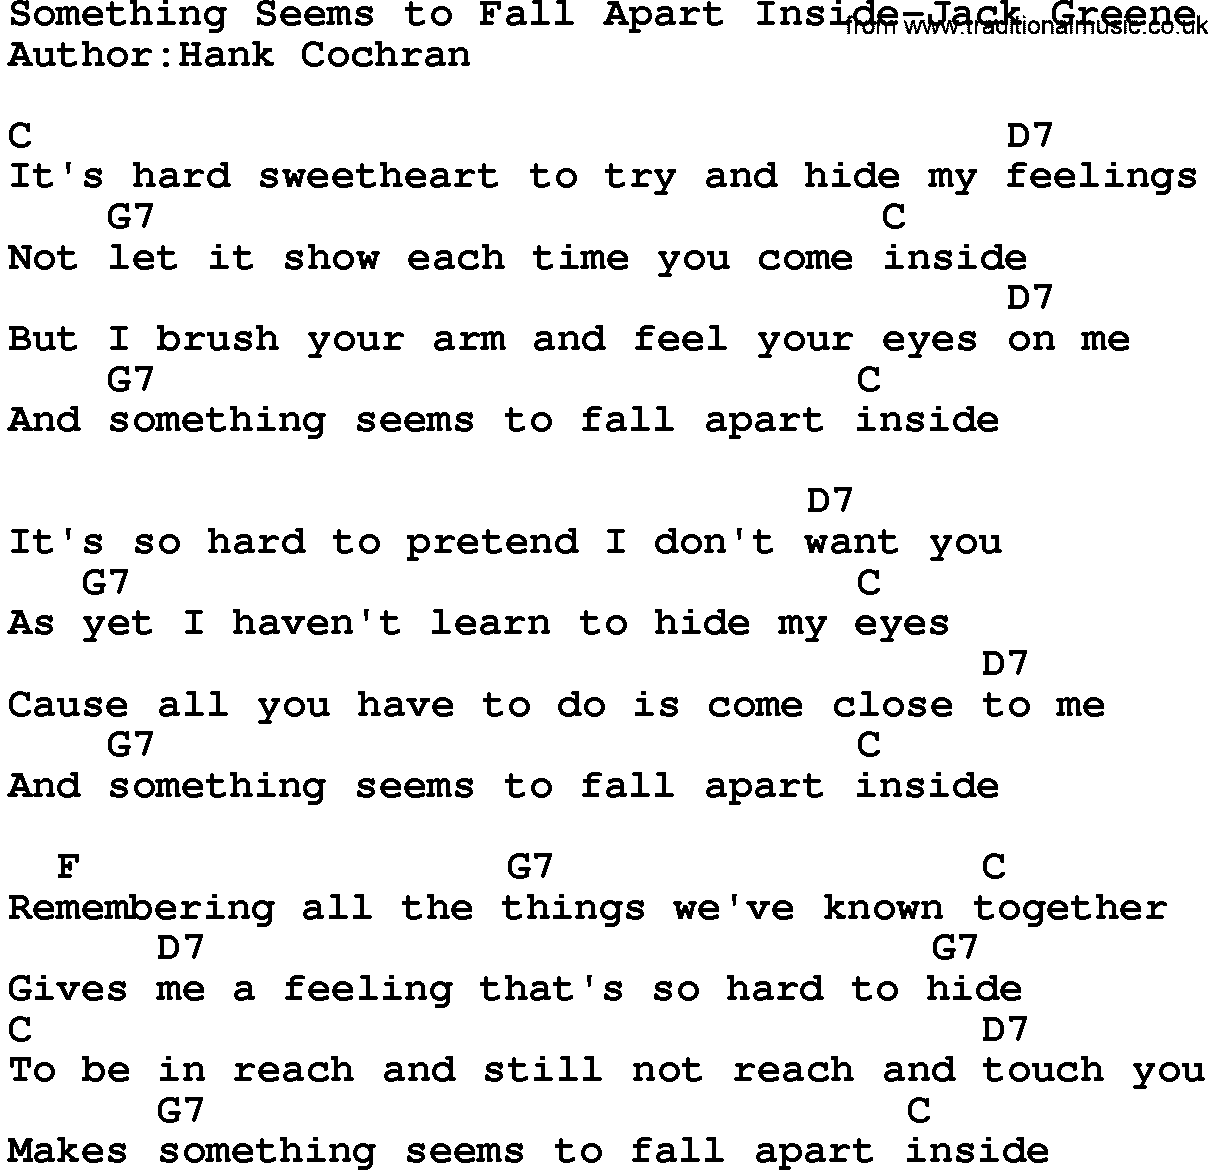 Country music song: Something Seems To Fall Apart Inside-Jack Greene lyrics and chords